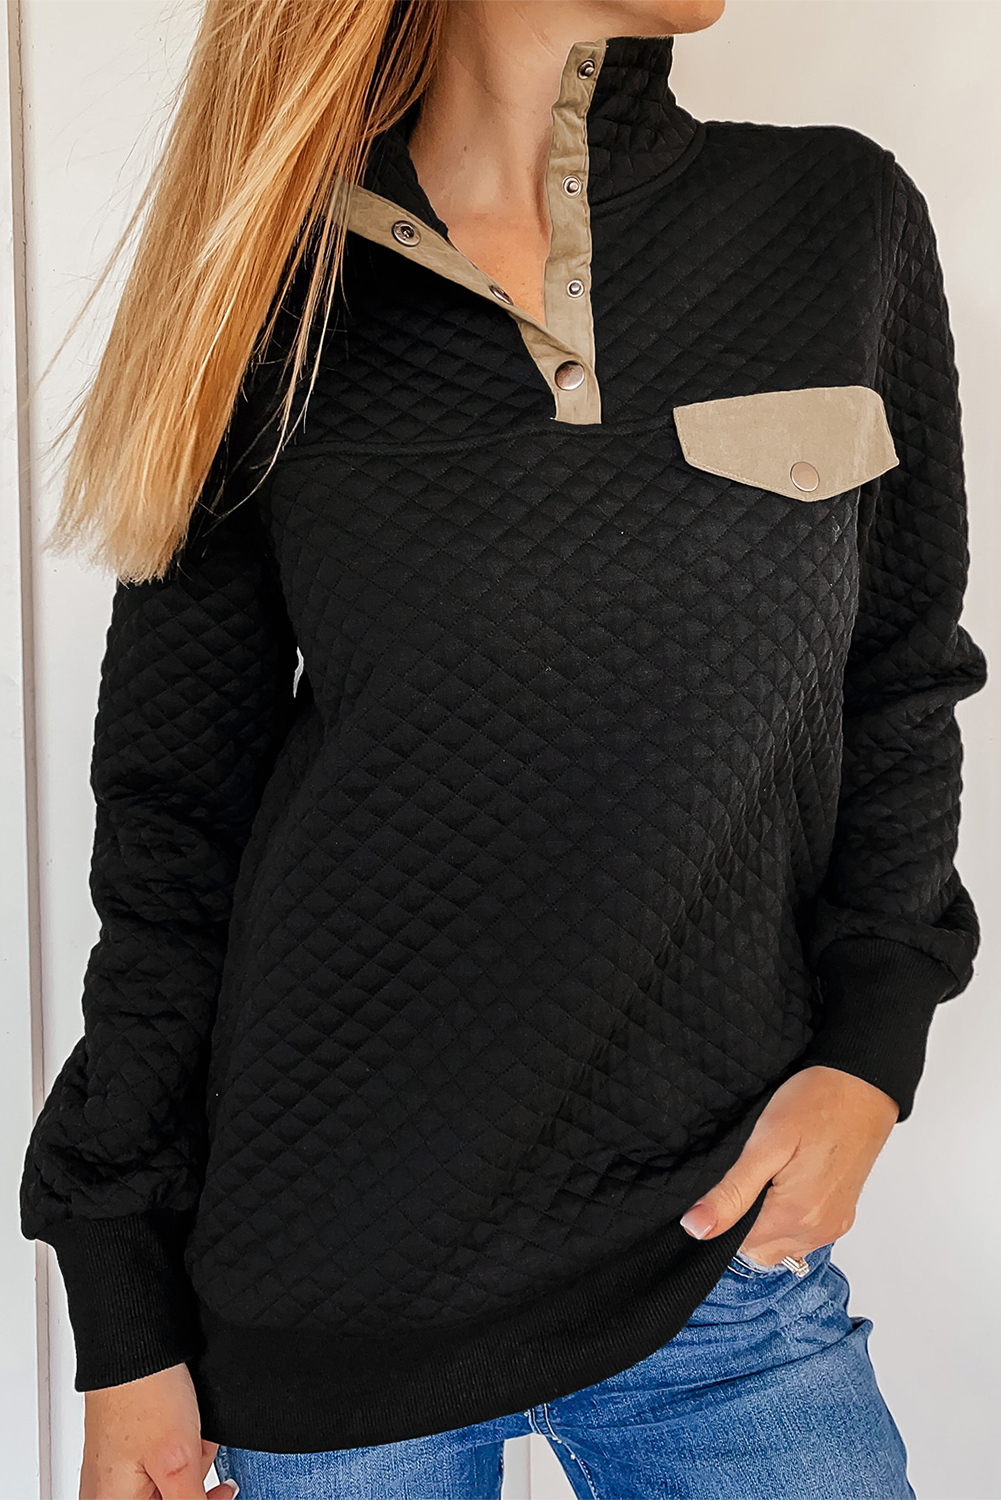 Shewin Wholesale Apparel Boutique Black Stand Collar Quilted Snap Button Sweatshirt